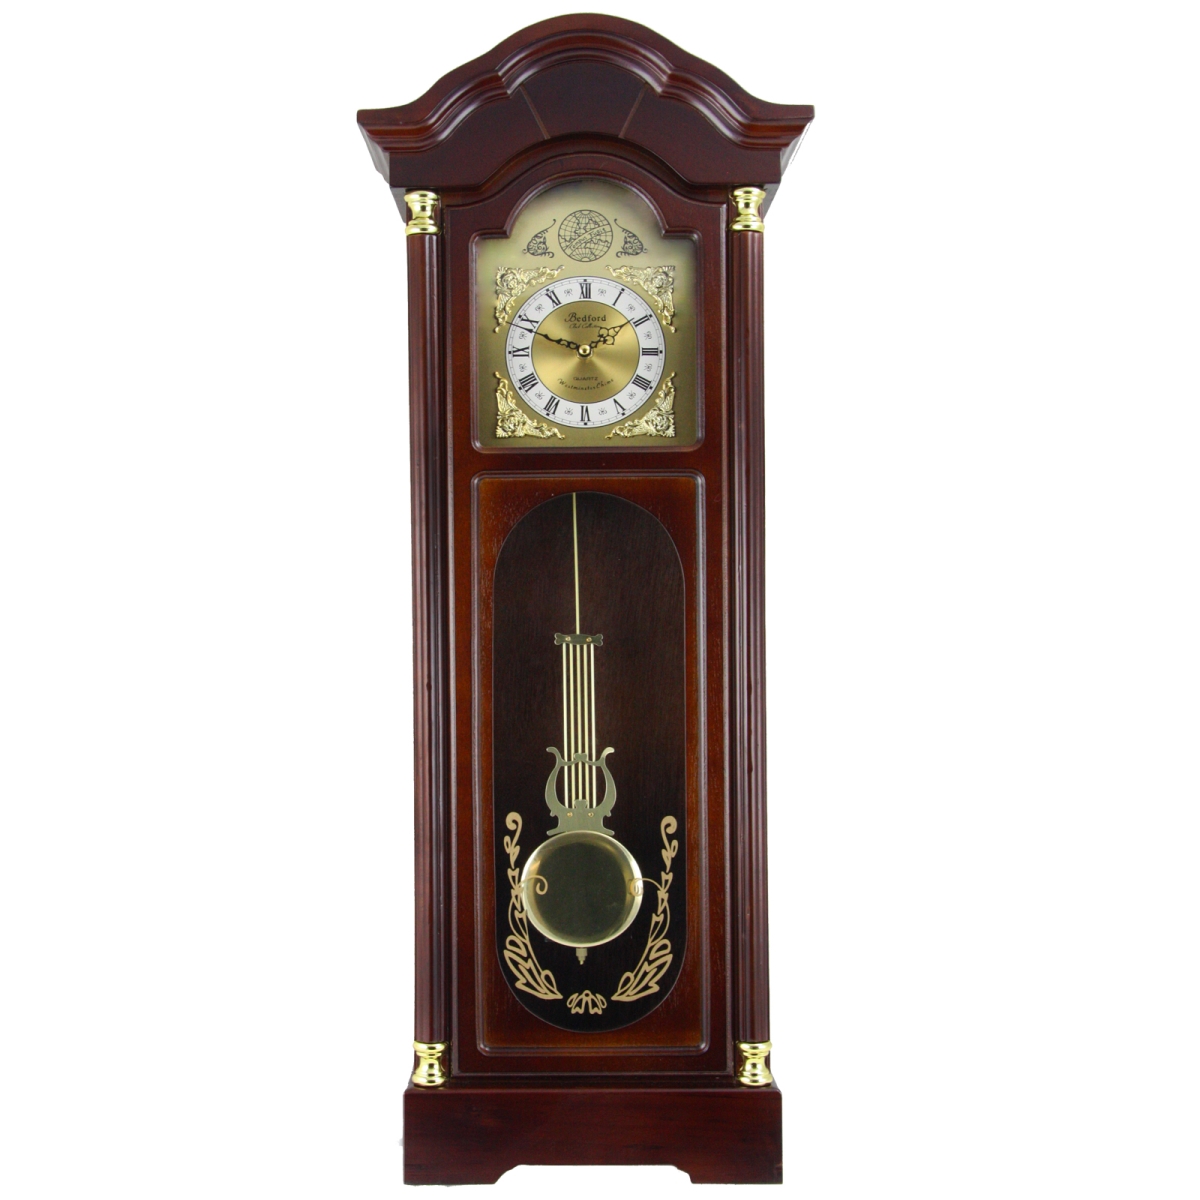 Picture of Bedford Clock Collection BED-1615 33 in. Antique Cherry Chiming Wall Clock with Roman Numerals, Oak Finish